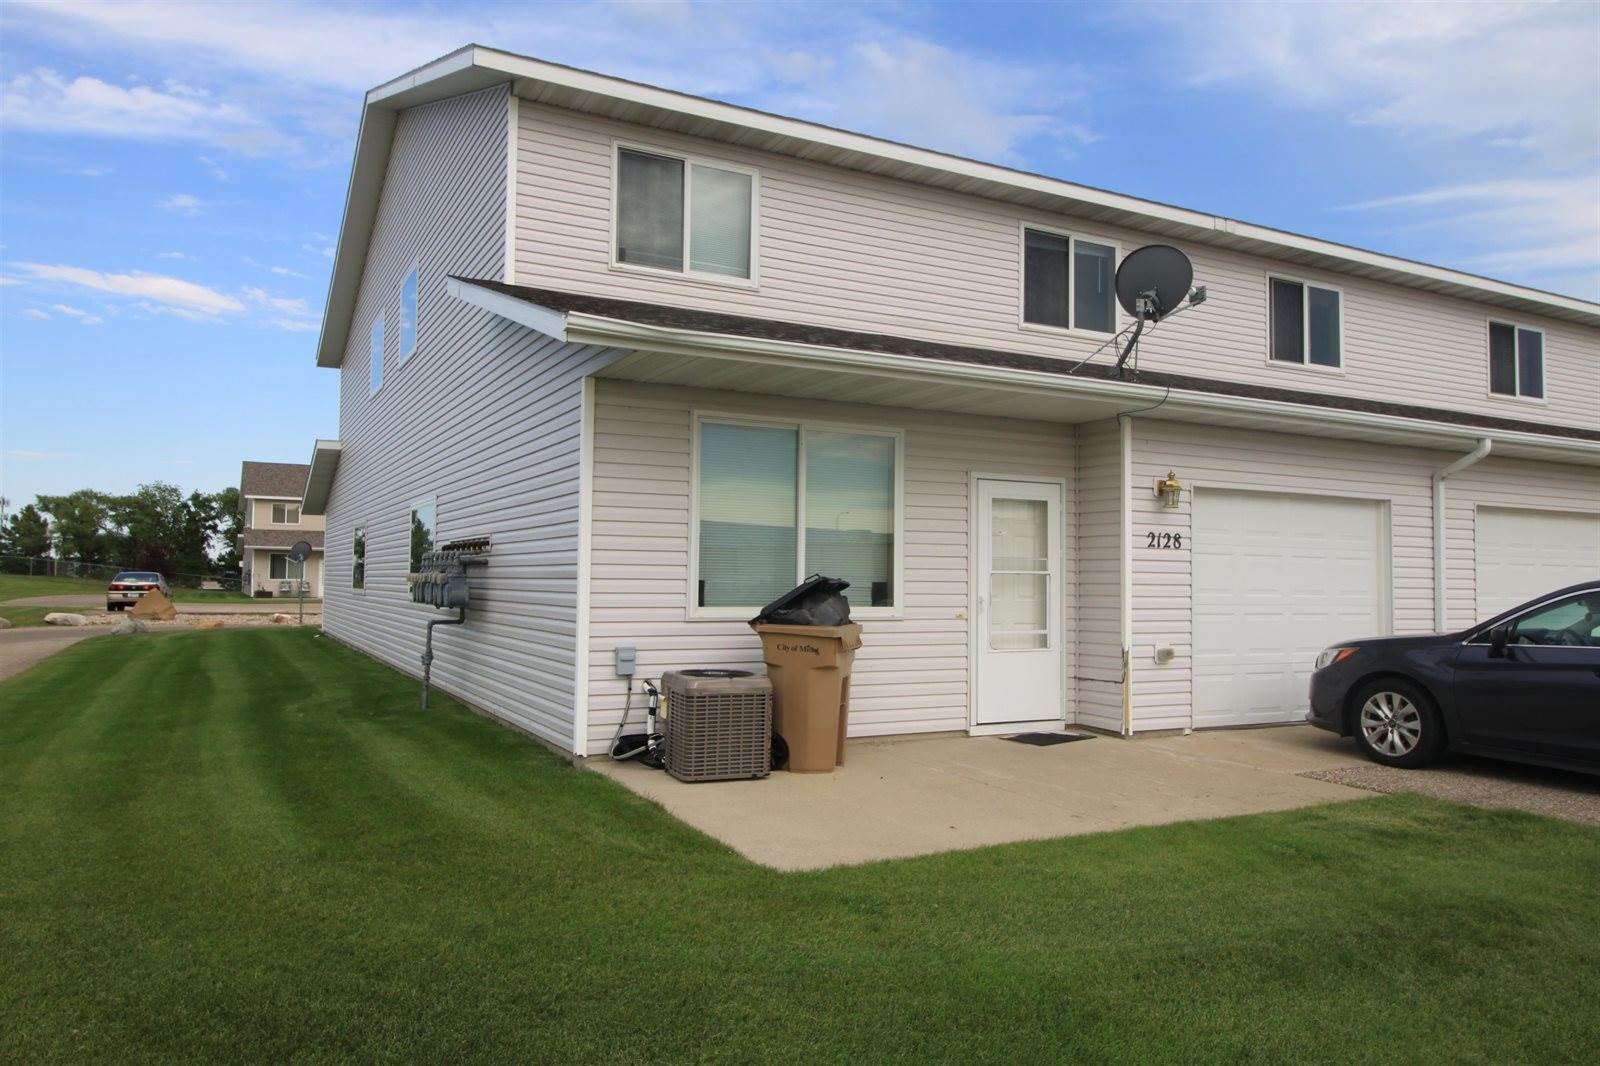 2128 14th St NW, Minot, ND 58703